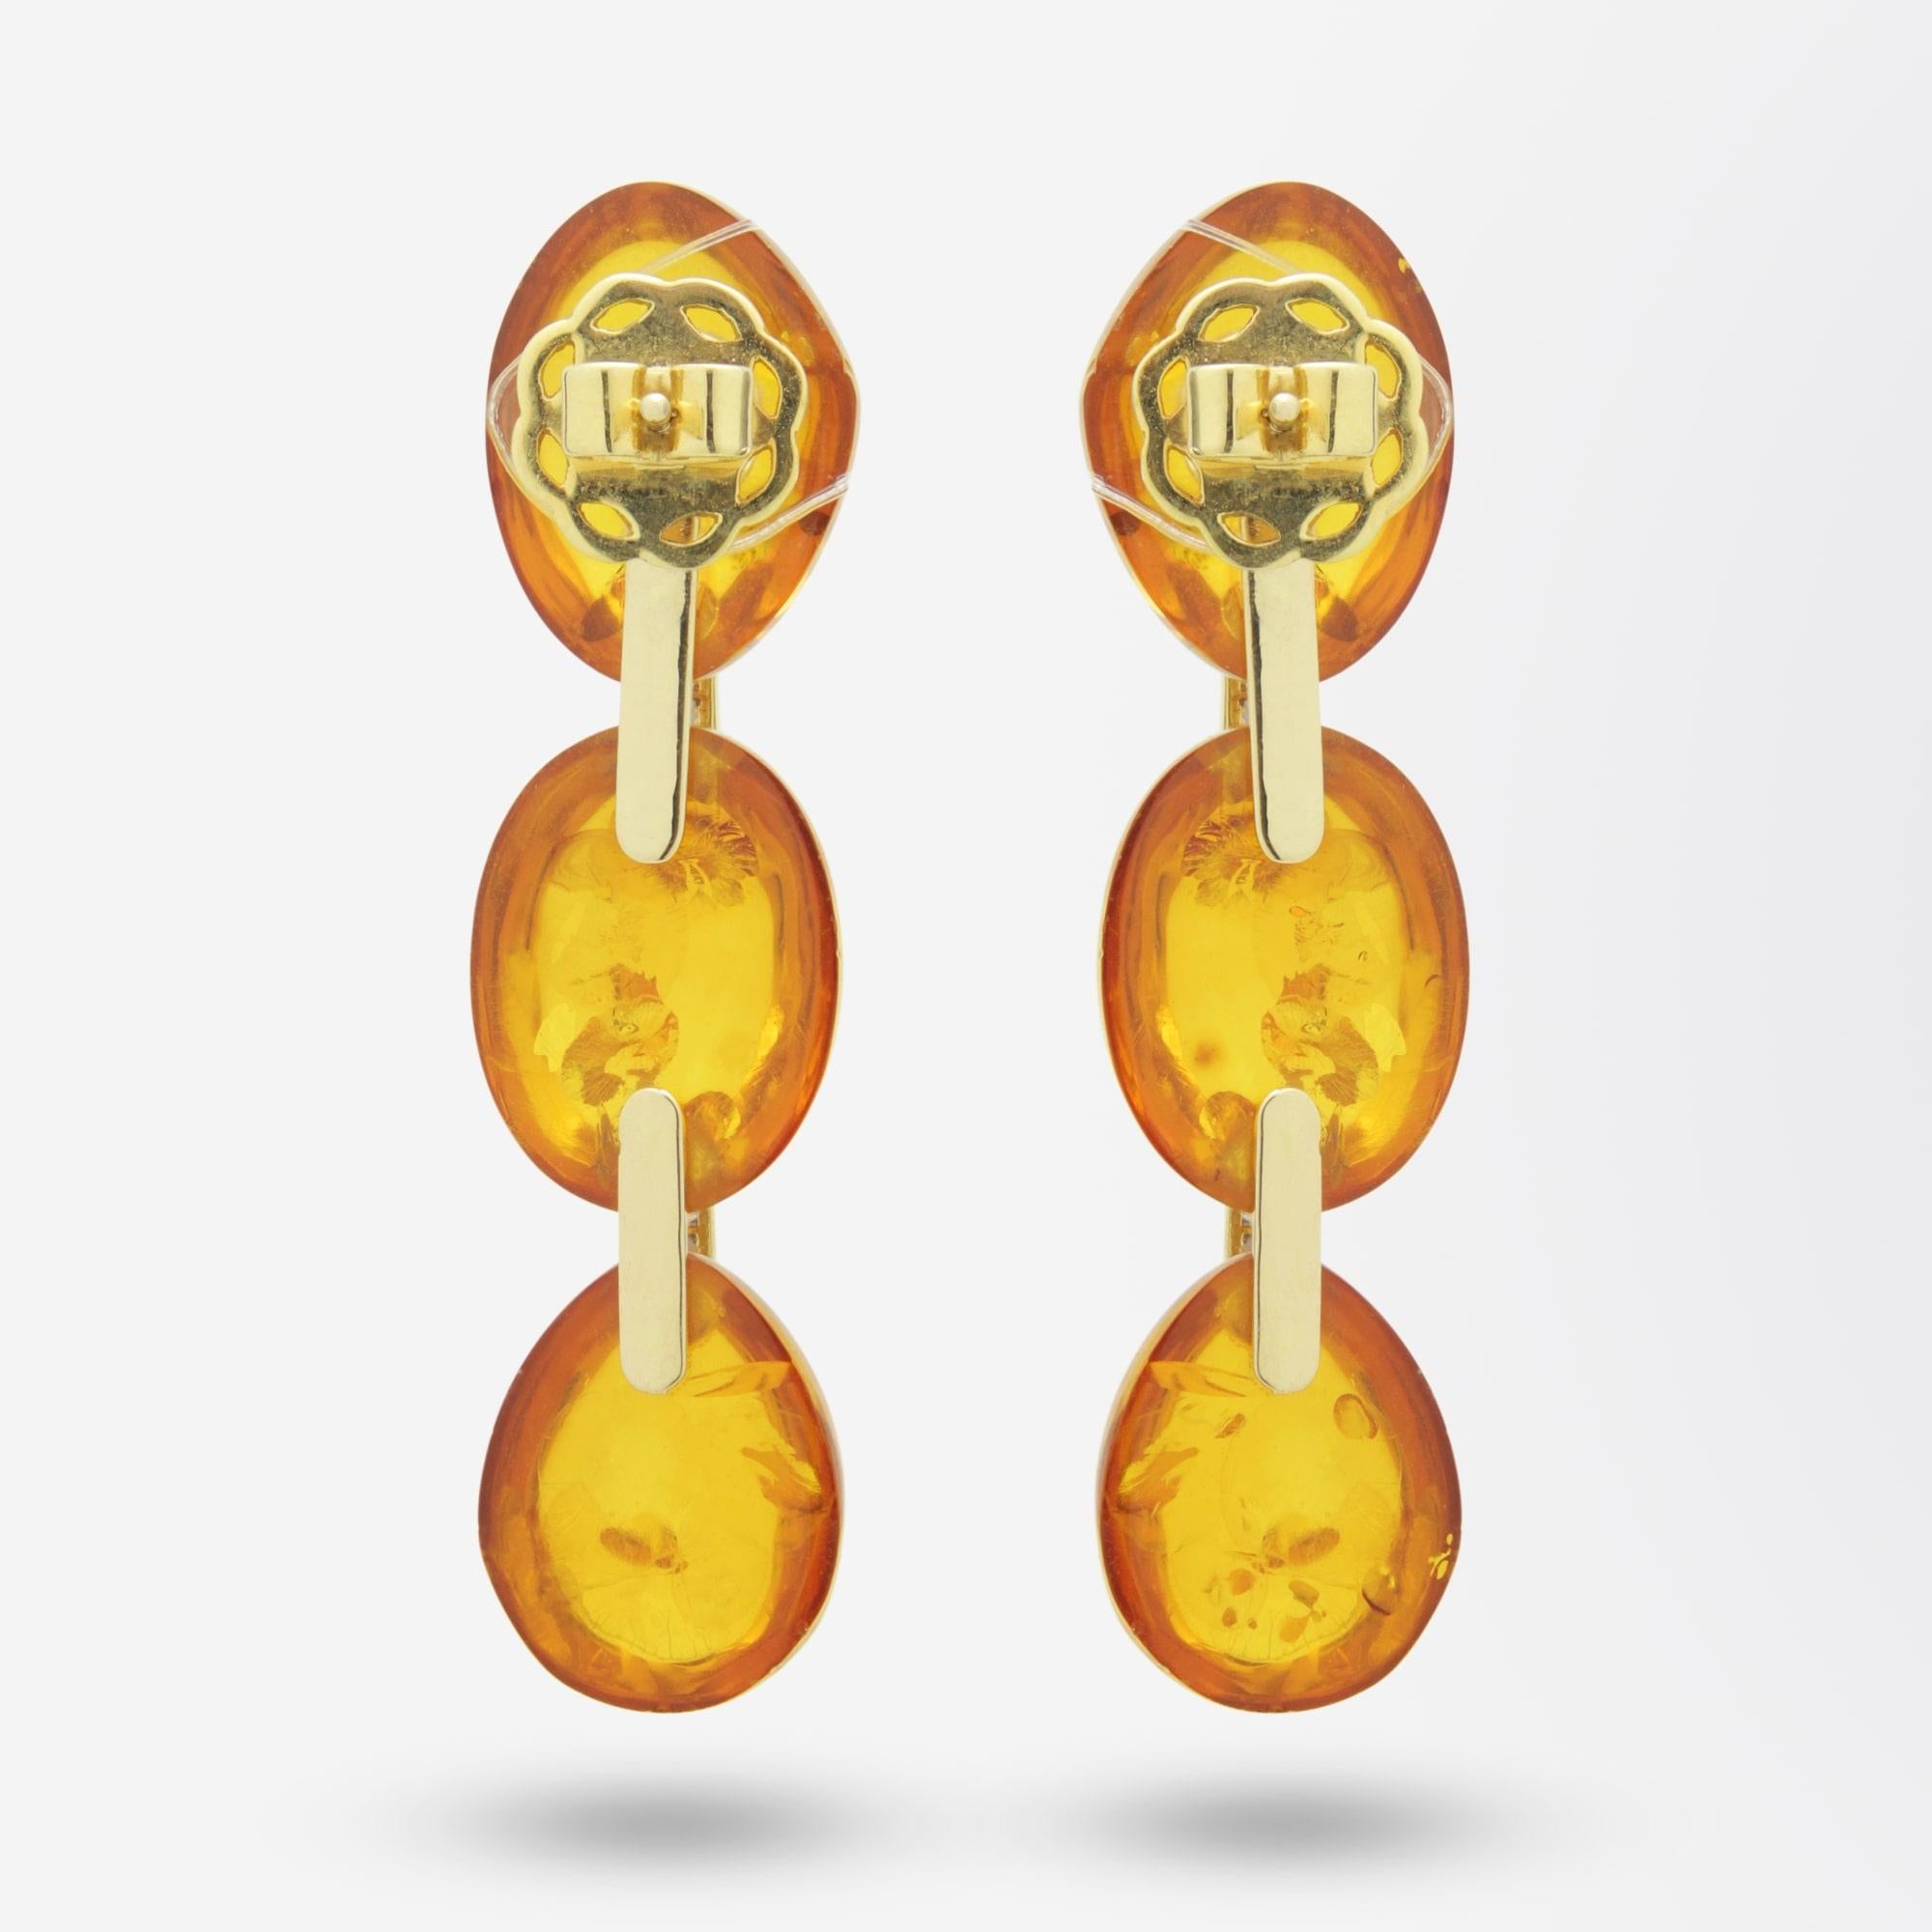 A pair of drop earrings crafted from 18 karat gold, diamonds and amber. The stud drop earrings are formed with three highly polished pieces of cabochon amber which are connected by links of 18 karat yellow gold set with brilliant cut diamonds. The